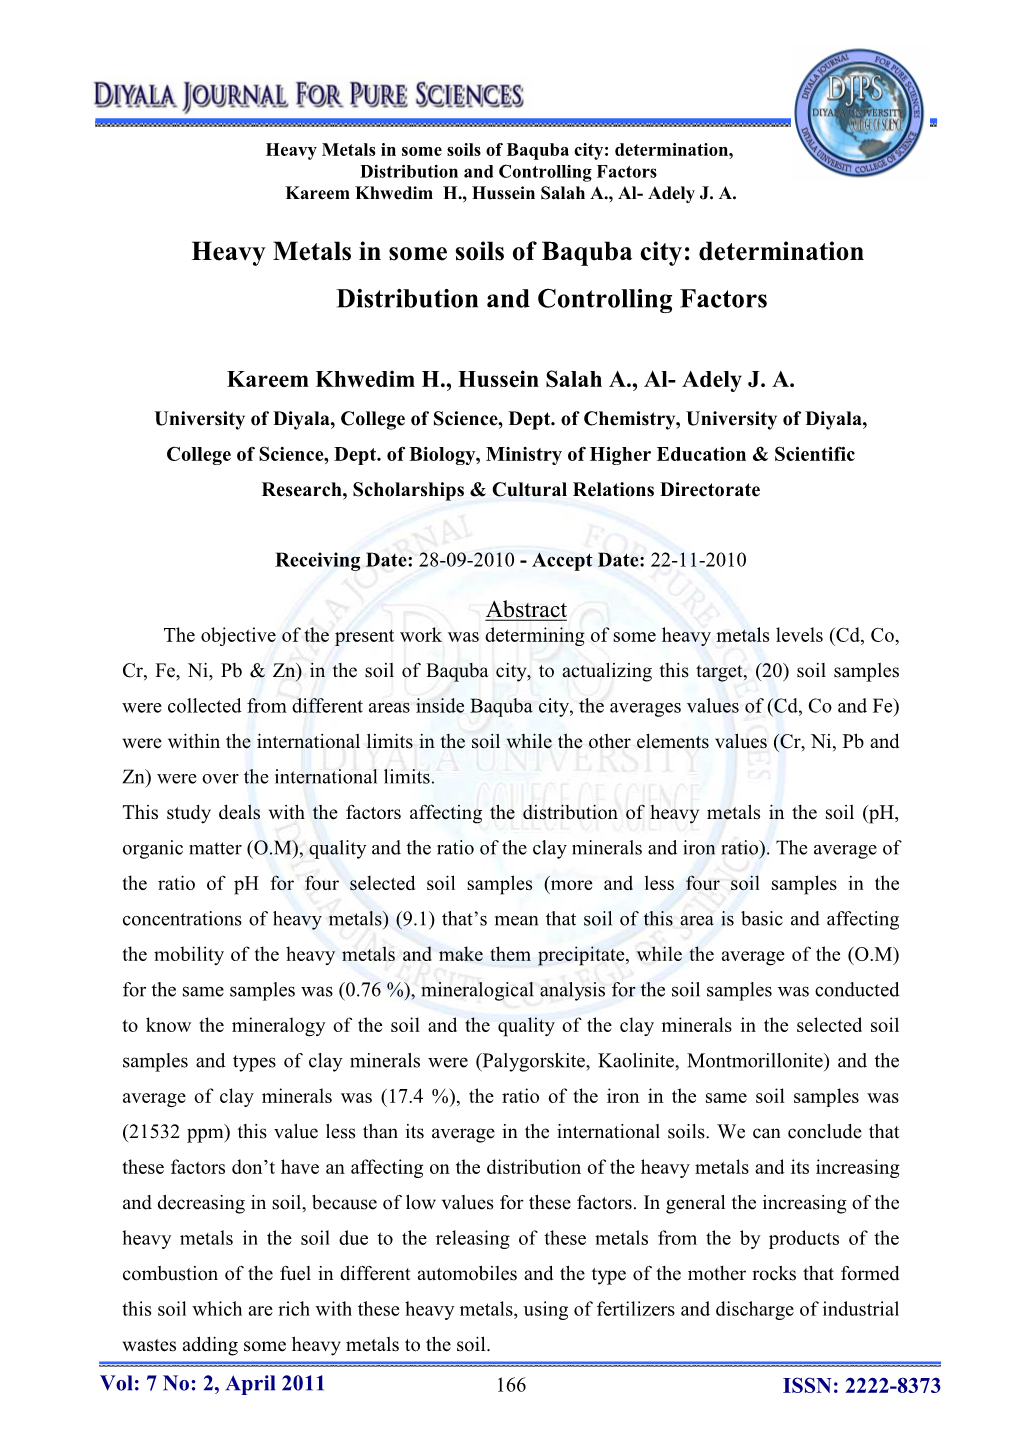 Heavy Metals in Some Soils of Baquba City: Determination, Distribution and Controlling Factors Kareem Khwedim H., Hussein Salah A., Al- Adely J